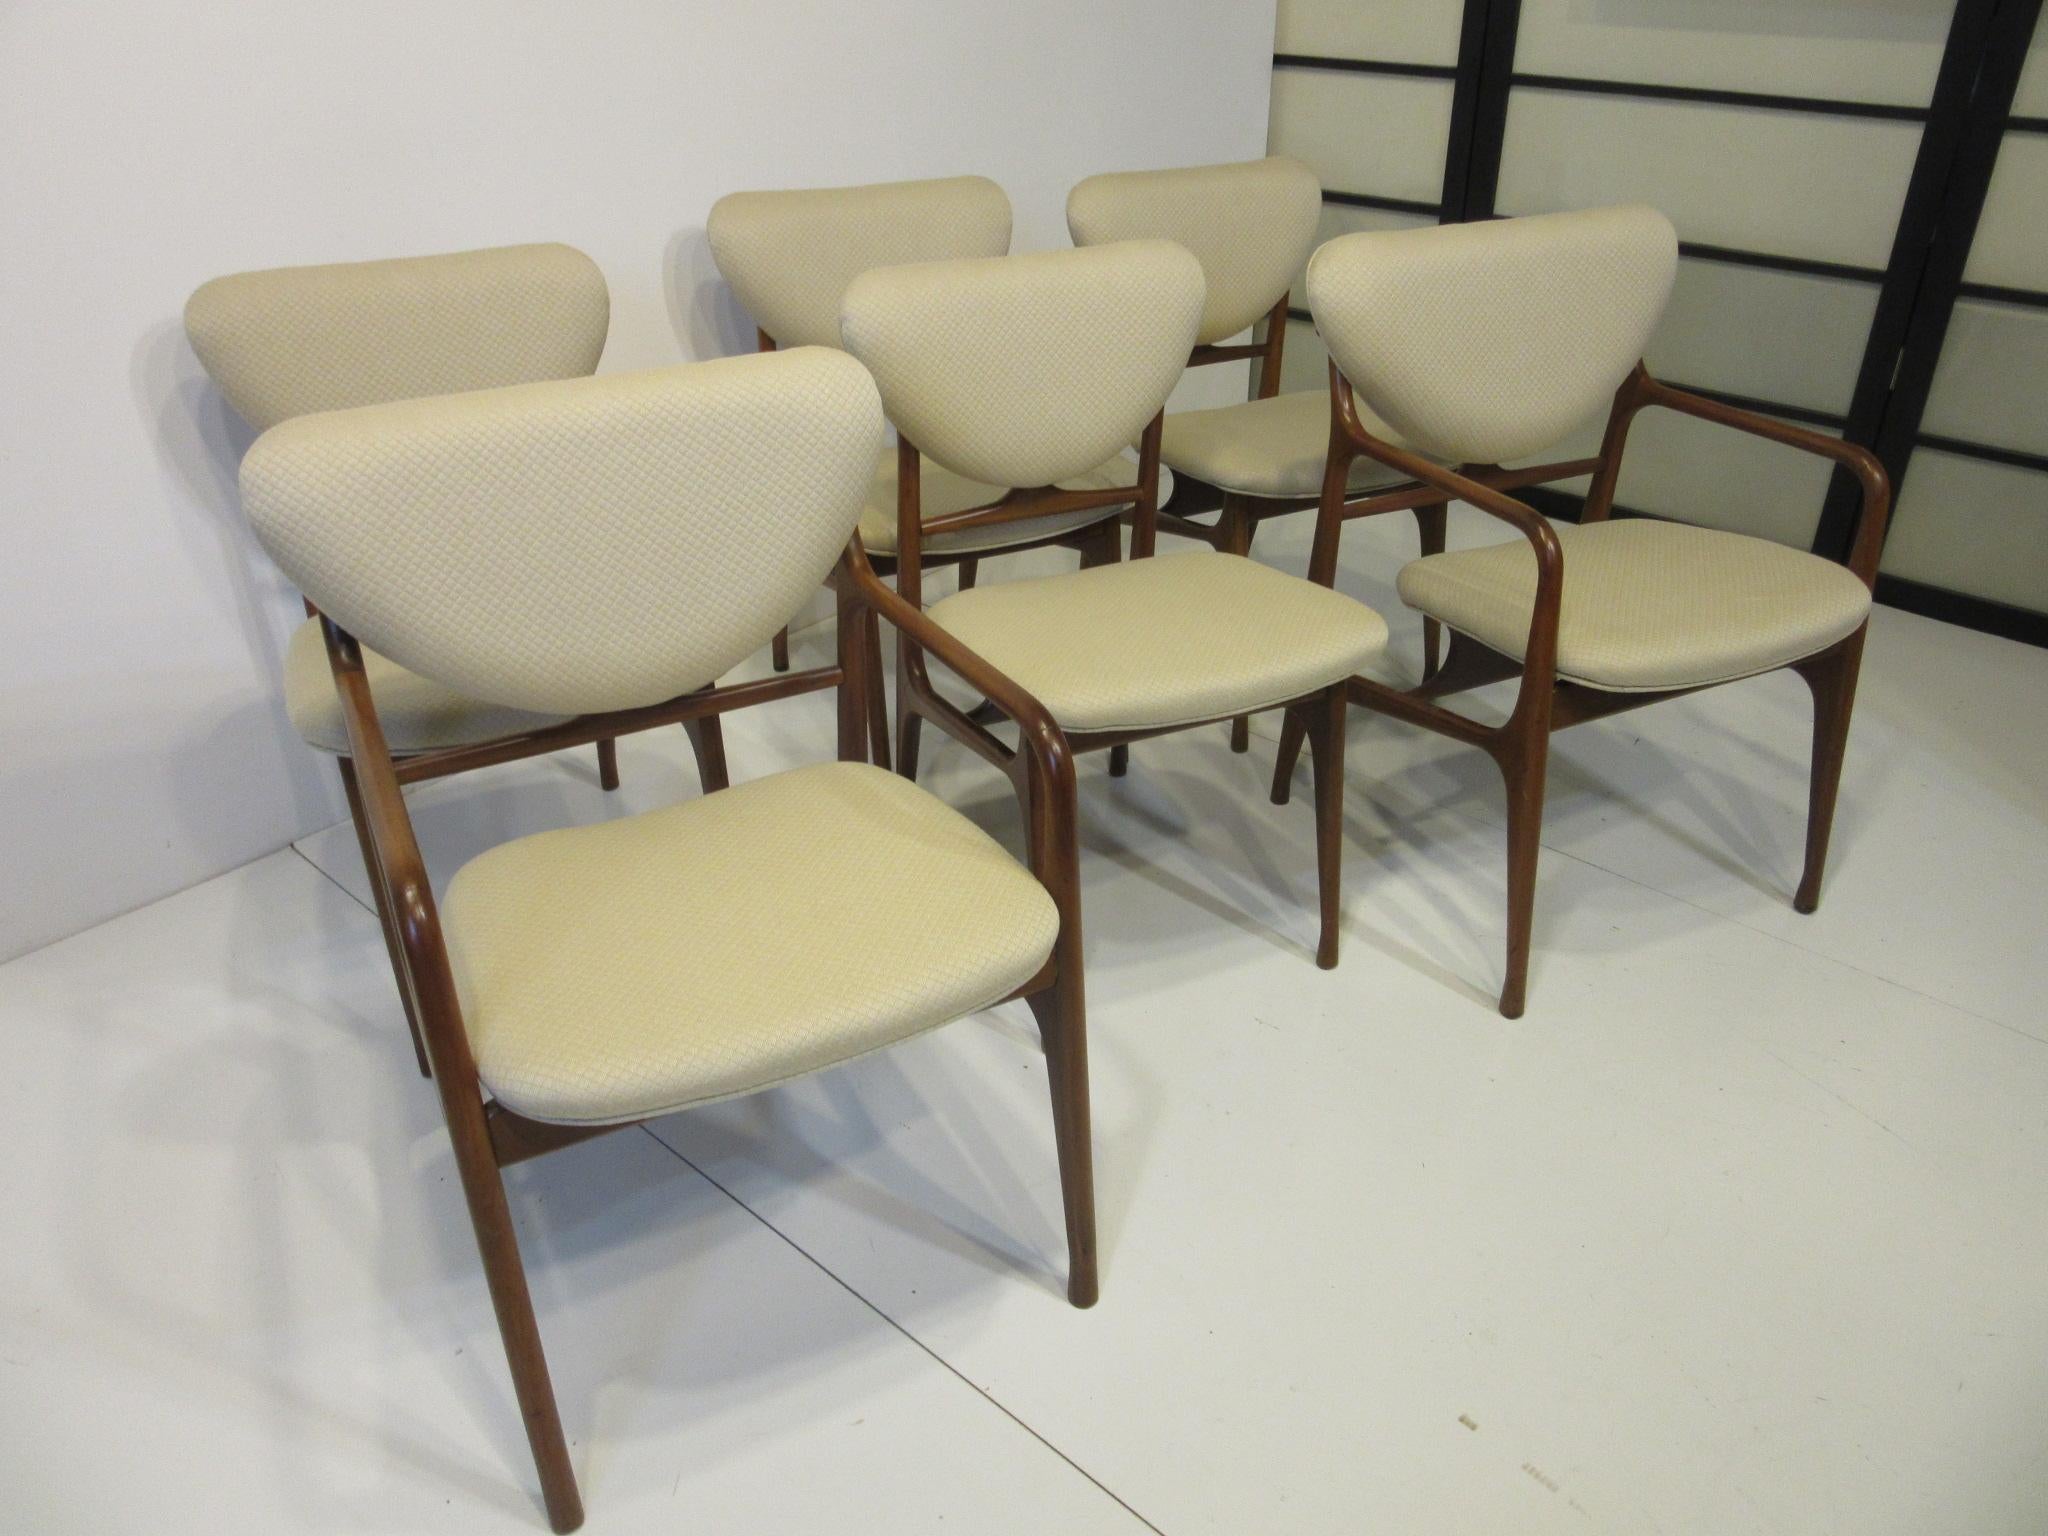 A set of six sculptural mahogany dining chairs with diamond quilted fabric in a creamy tone consisting of two armchairs and four side chairs. The bottom and back cushions have a floating affect making them appear light and airy on the well jointed